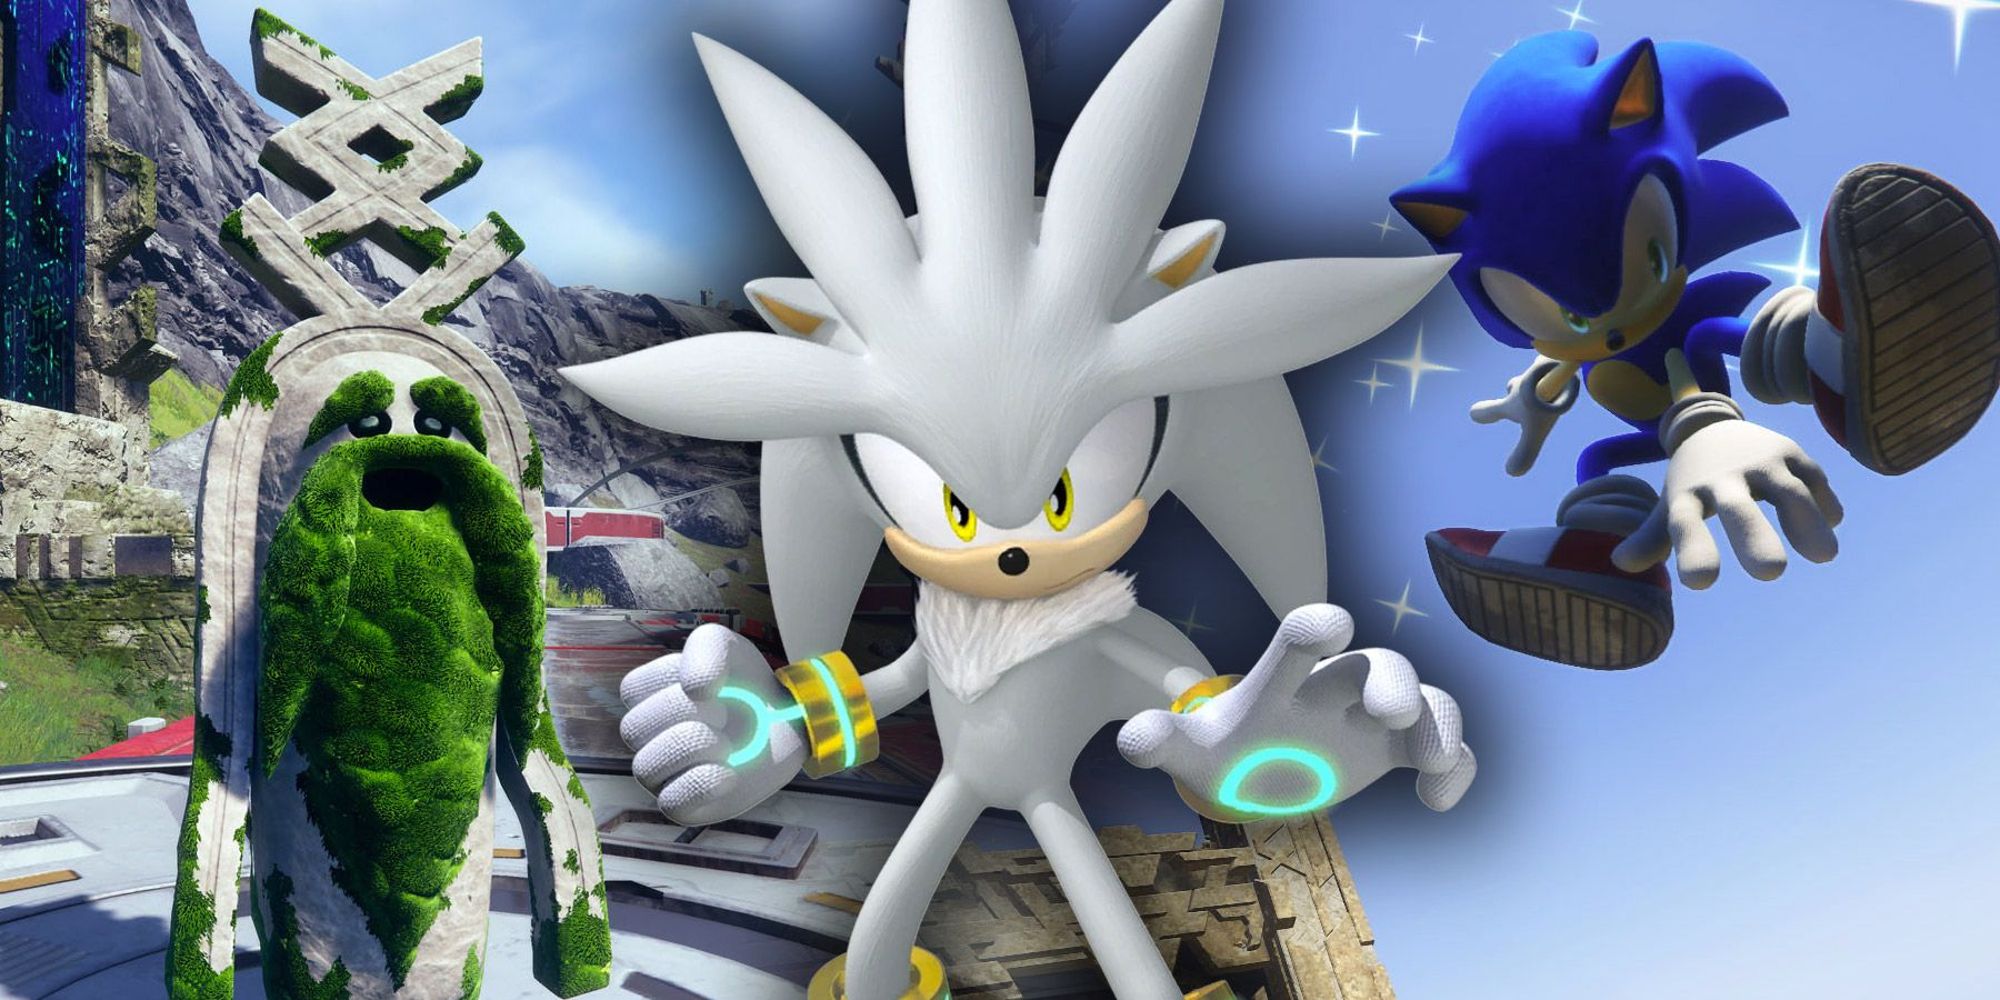 Silver the Hedgehog, a fluffy gray companion from Sonic 06, overlaid on footage from Sonic Frontiers.